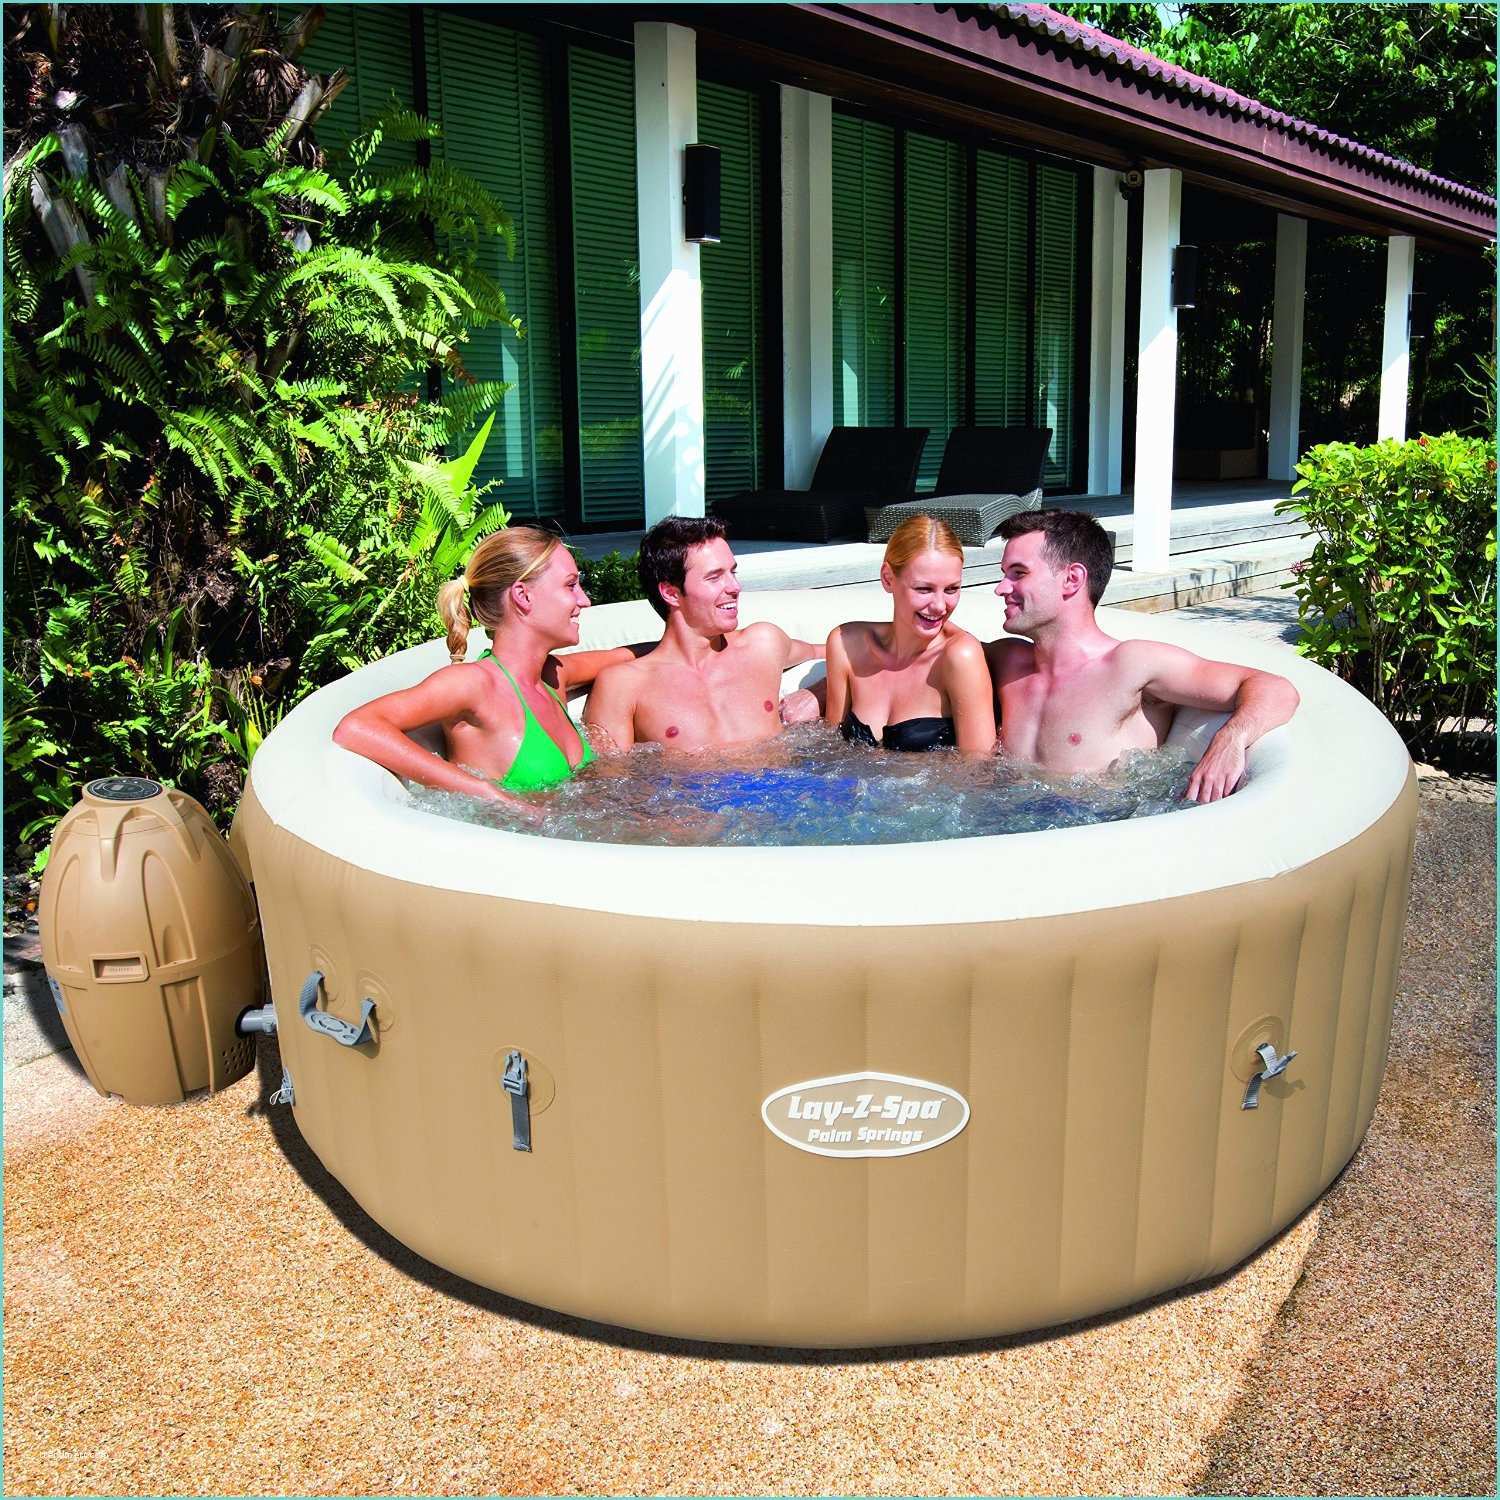 Idromassaggio Gonfiabile Leroy Merlin Lay Z Spa Palm Springs Inflatable Hot Tub Spa Review